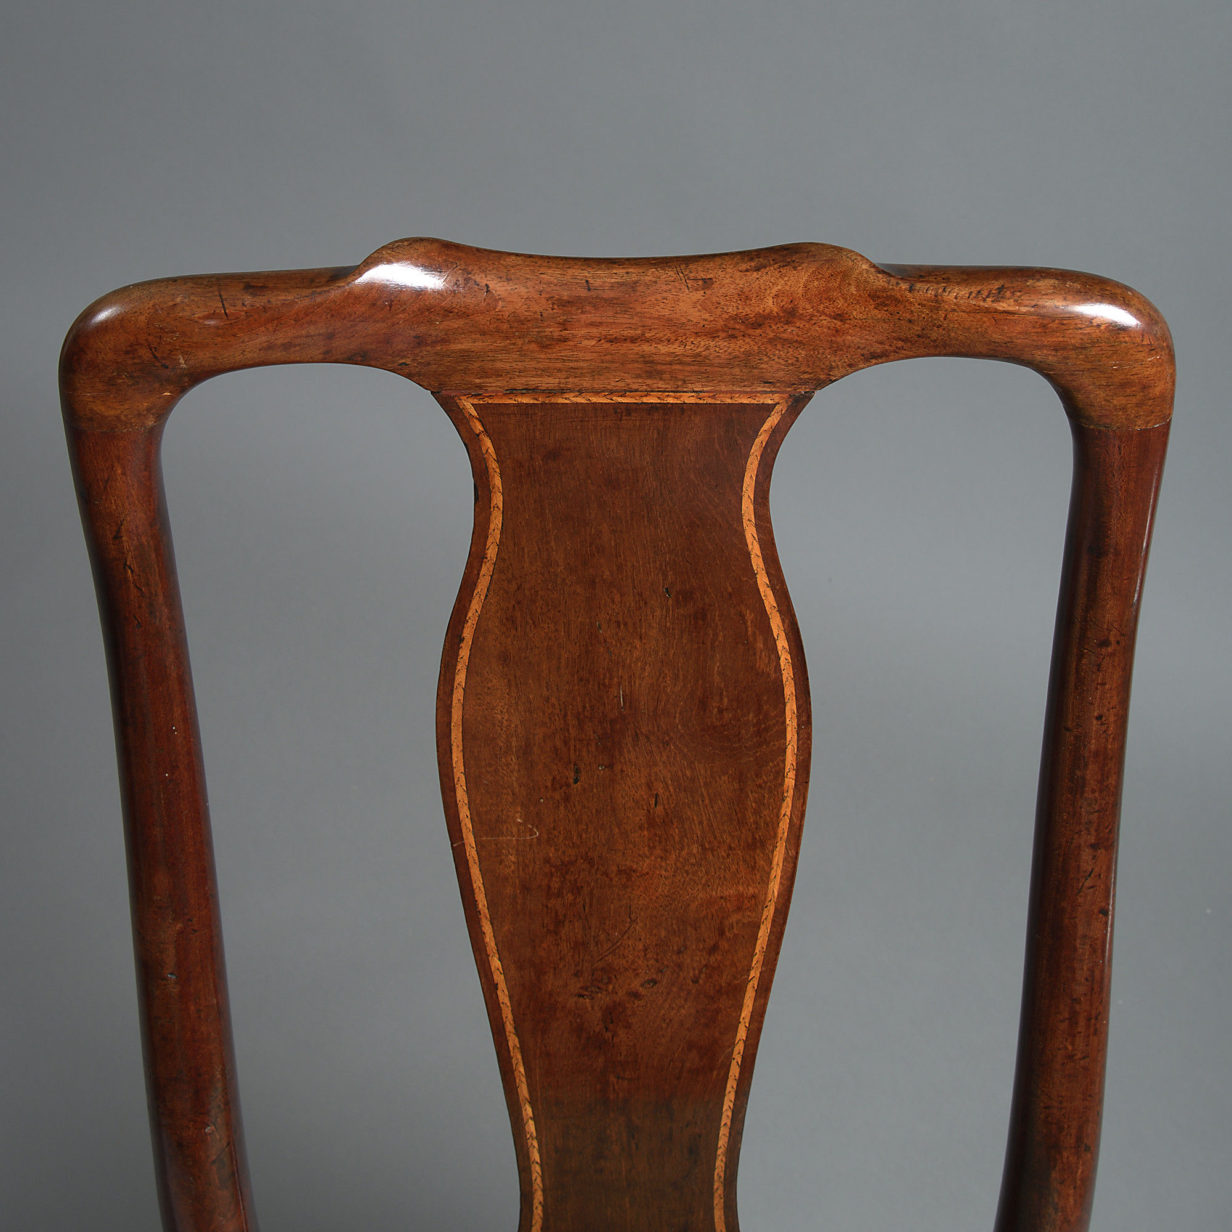 An 18th century set of four george ii period walnut side chairs